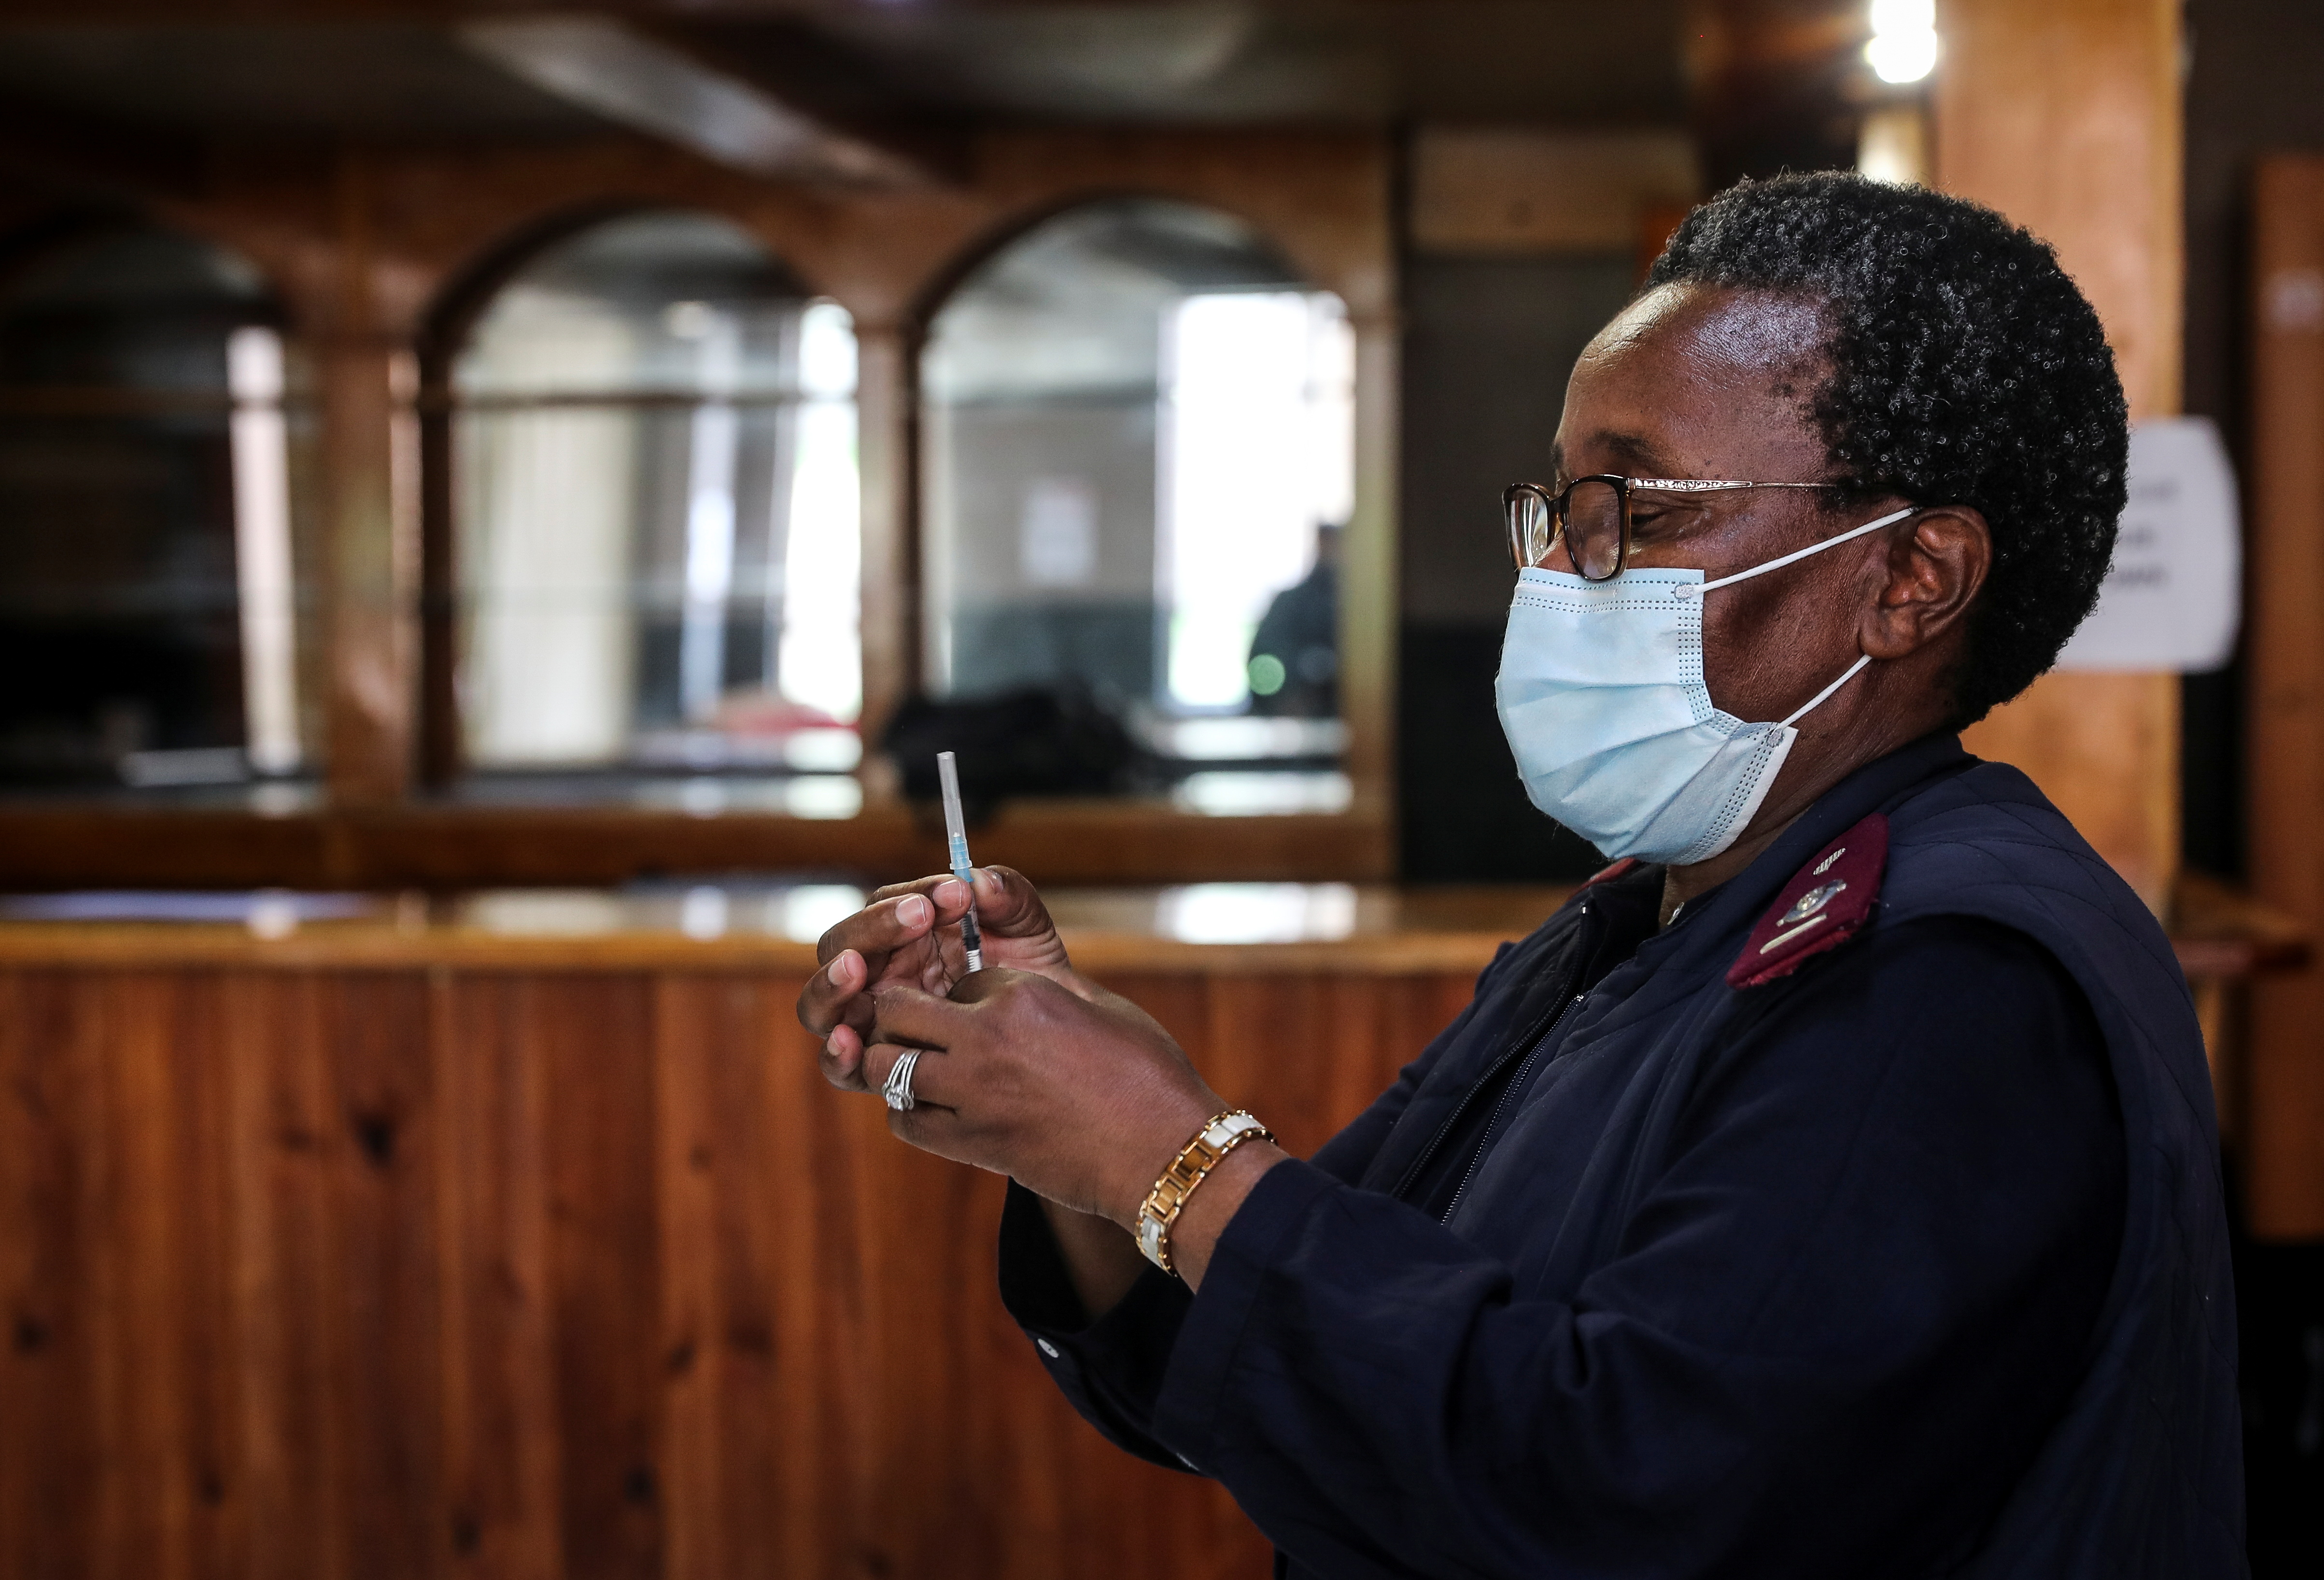 A healthcare worker prepares a dose of the Pfizer coronavirus disease (COVID-19) vaccine, amidst the spread of the SARS-CoV-2 variant Omicron, in Johannesburg